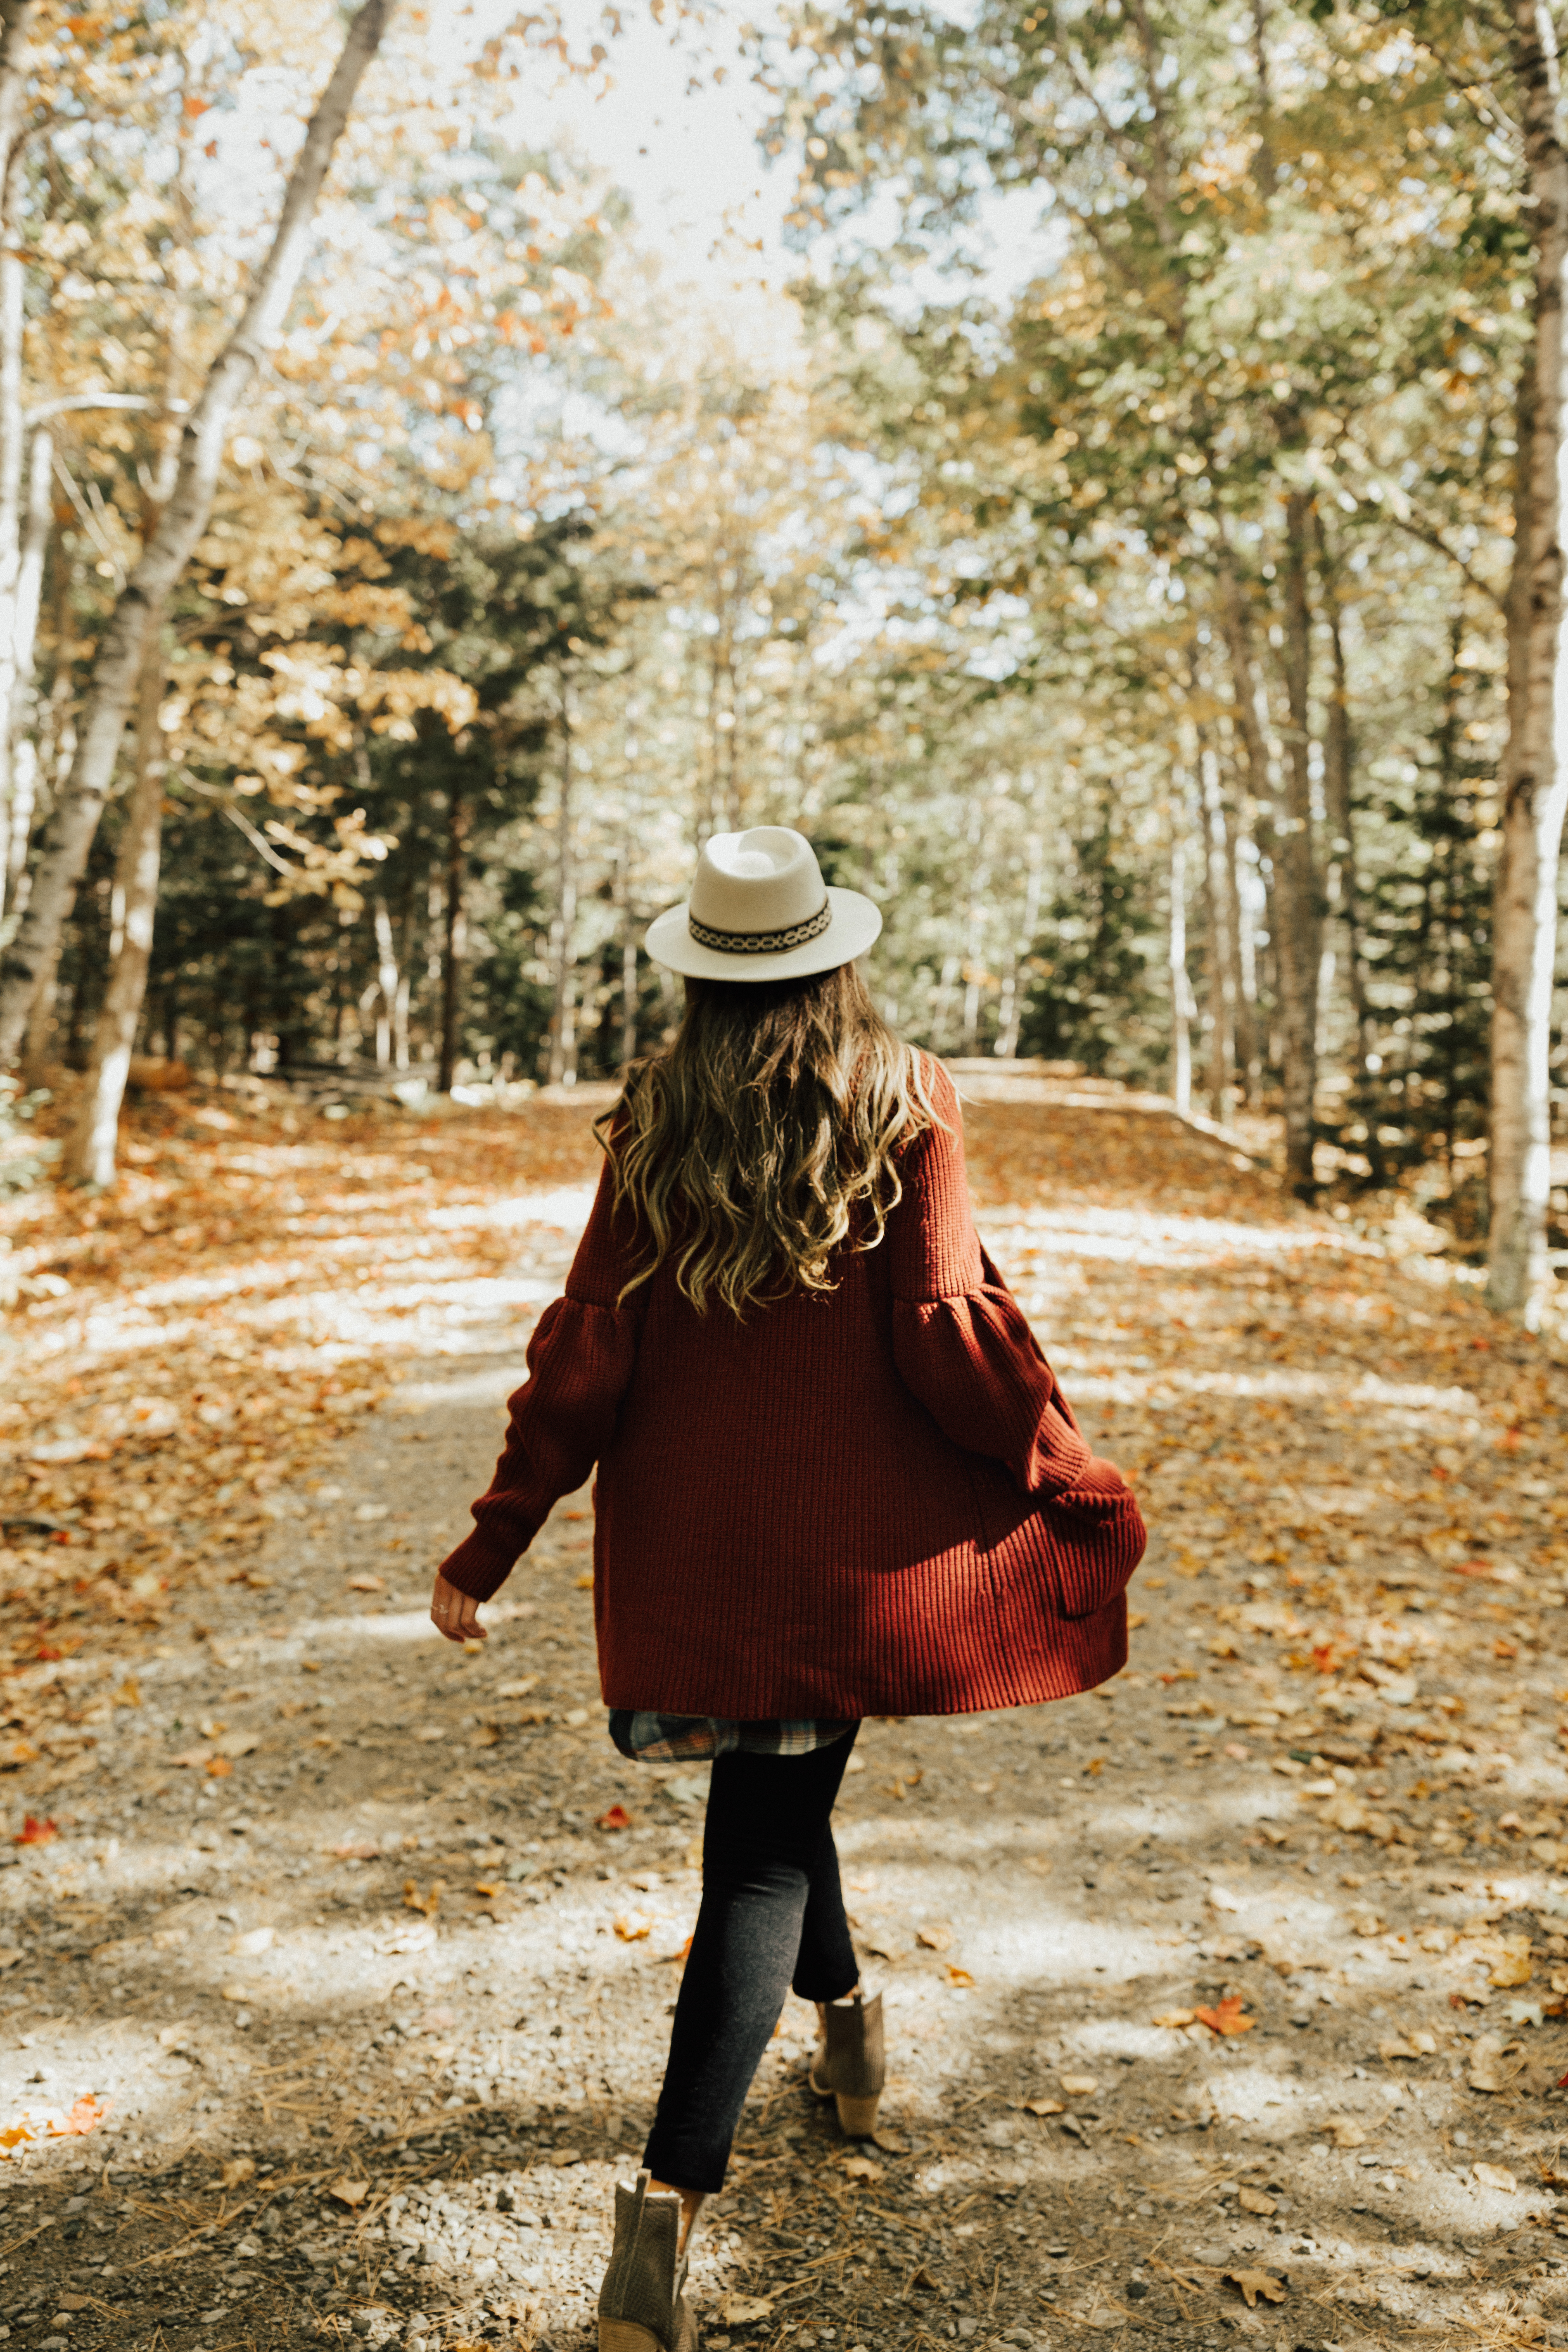 Featured On Anthropologie | Shades of Fall | Fall Fashion feature with Anthropologie | Fall Trends with Travel Blogger Elana Jadallah | Best Looks of Fall with Anthropologie | Exploring Camden Maine | Travel Diary Camden Maine via @elanaloo + elanaloo.com